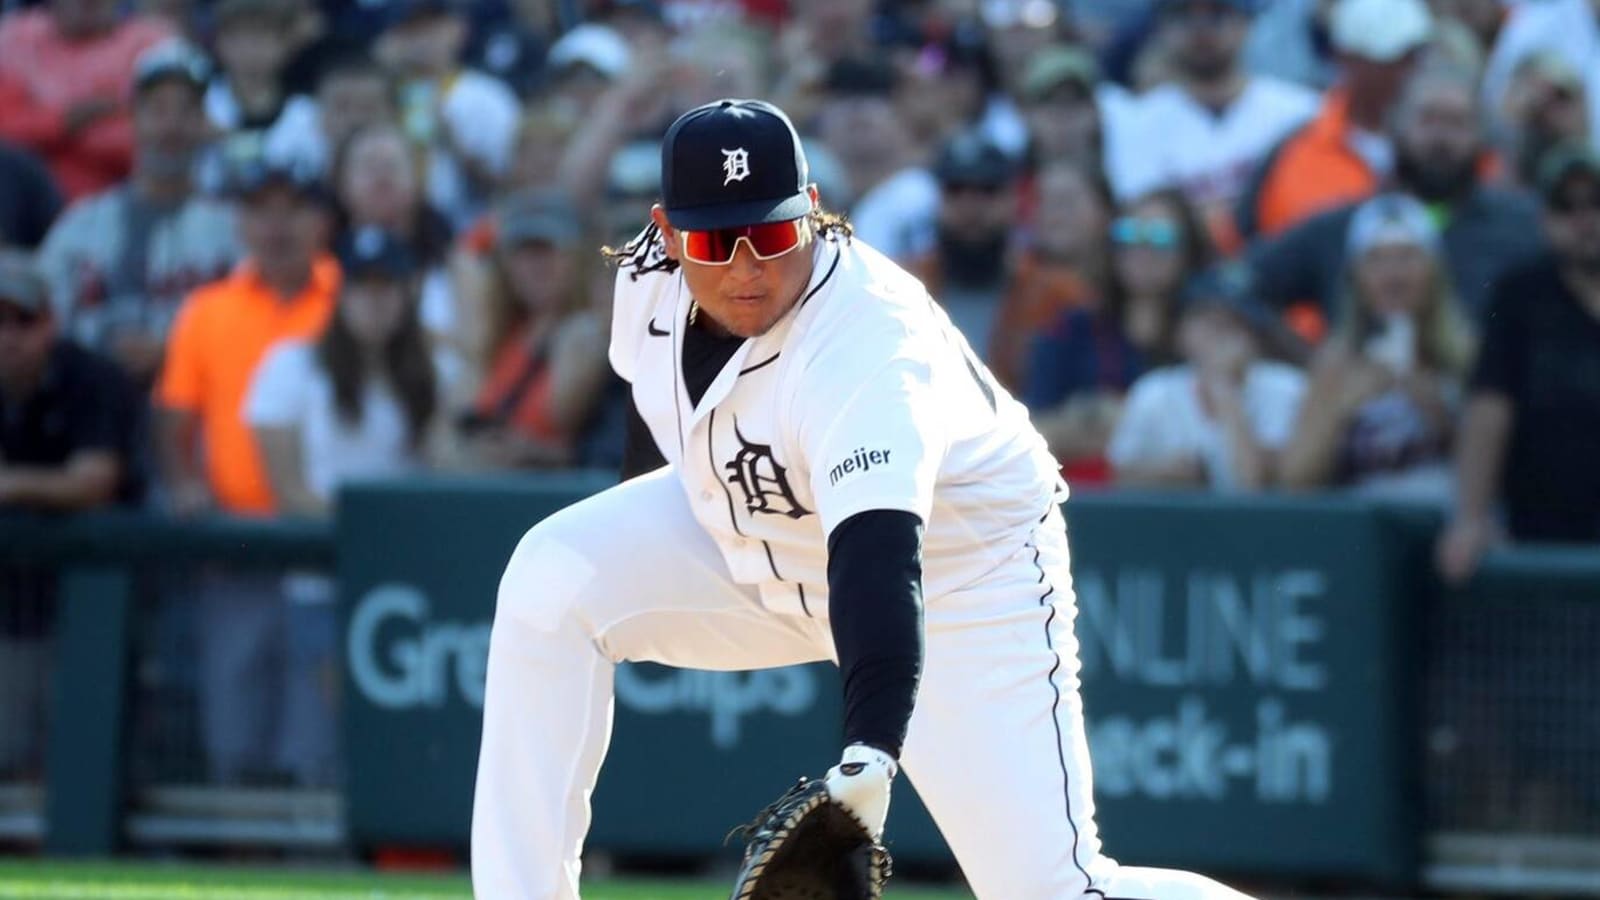 Fans honor Miguel Cabrera on Tigers legend's final game, Sports